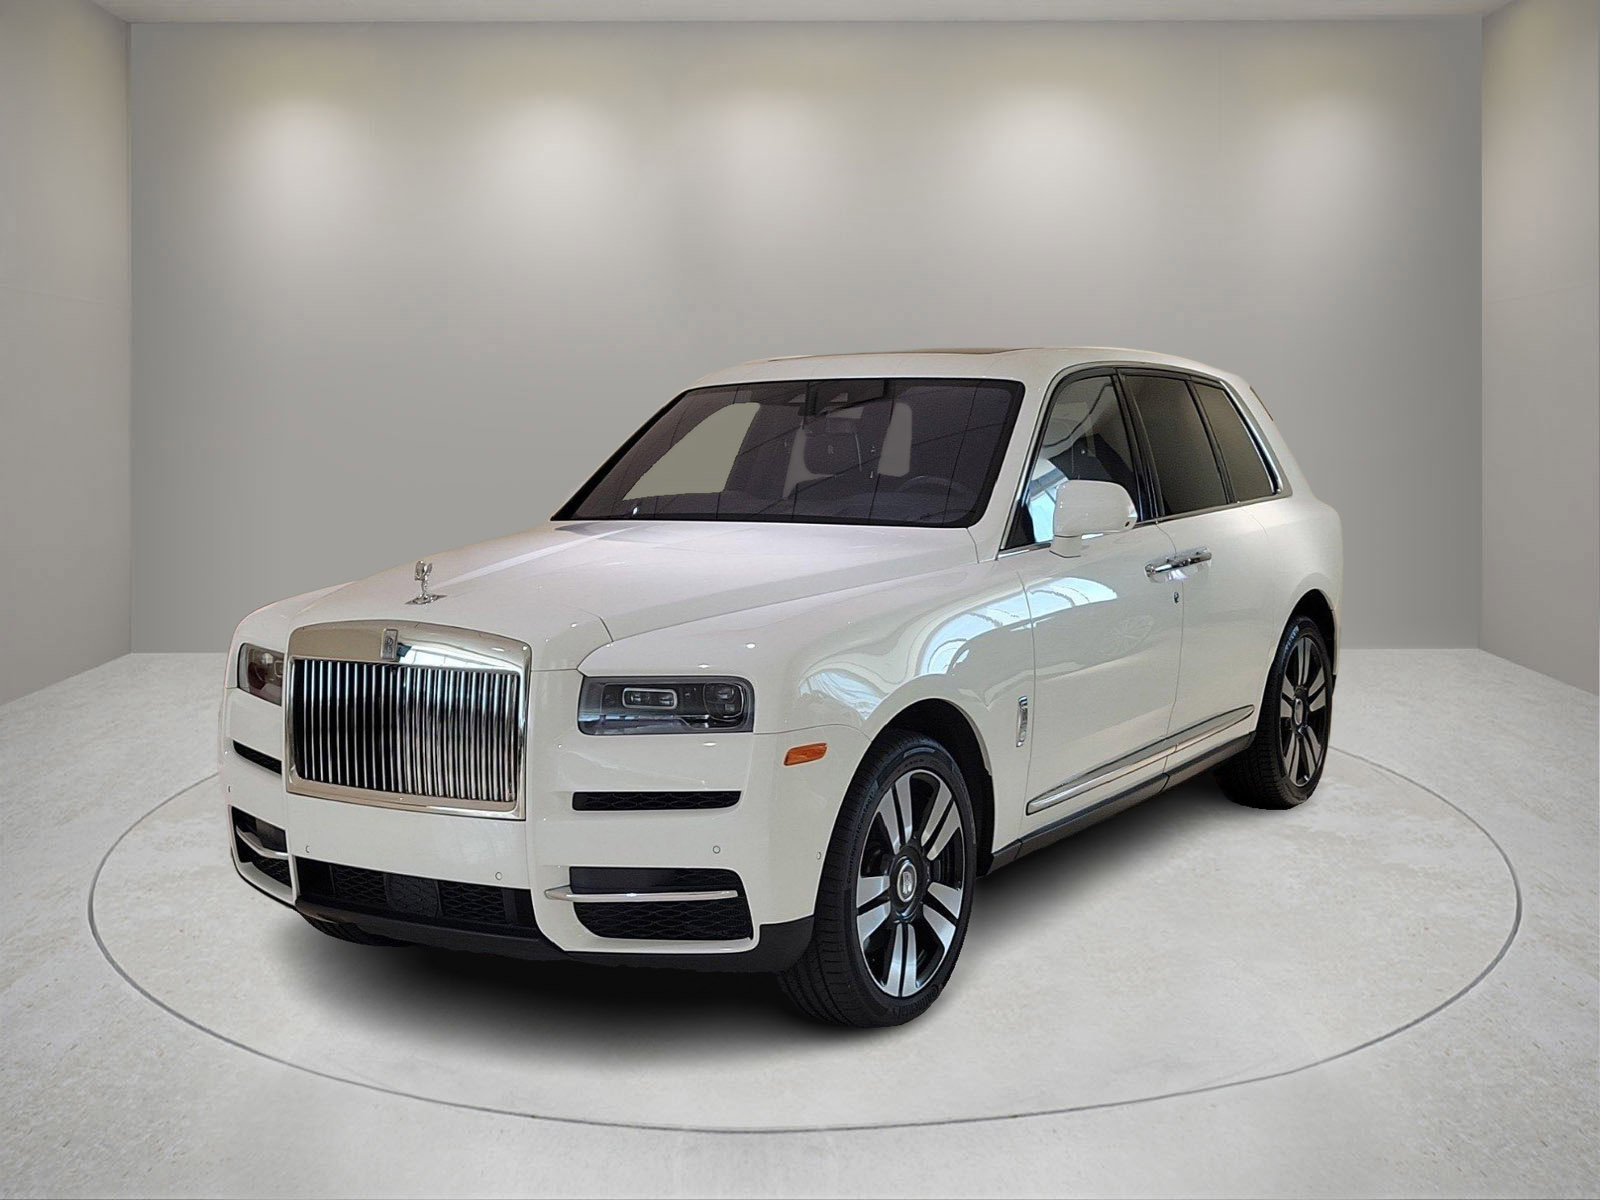 Used Rolls-Royce Cullinan for Sale - Autotrader